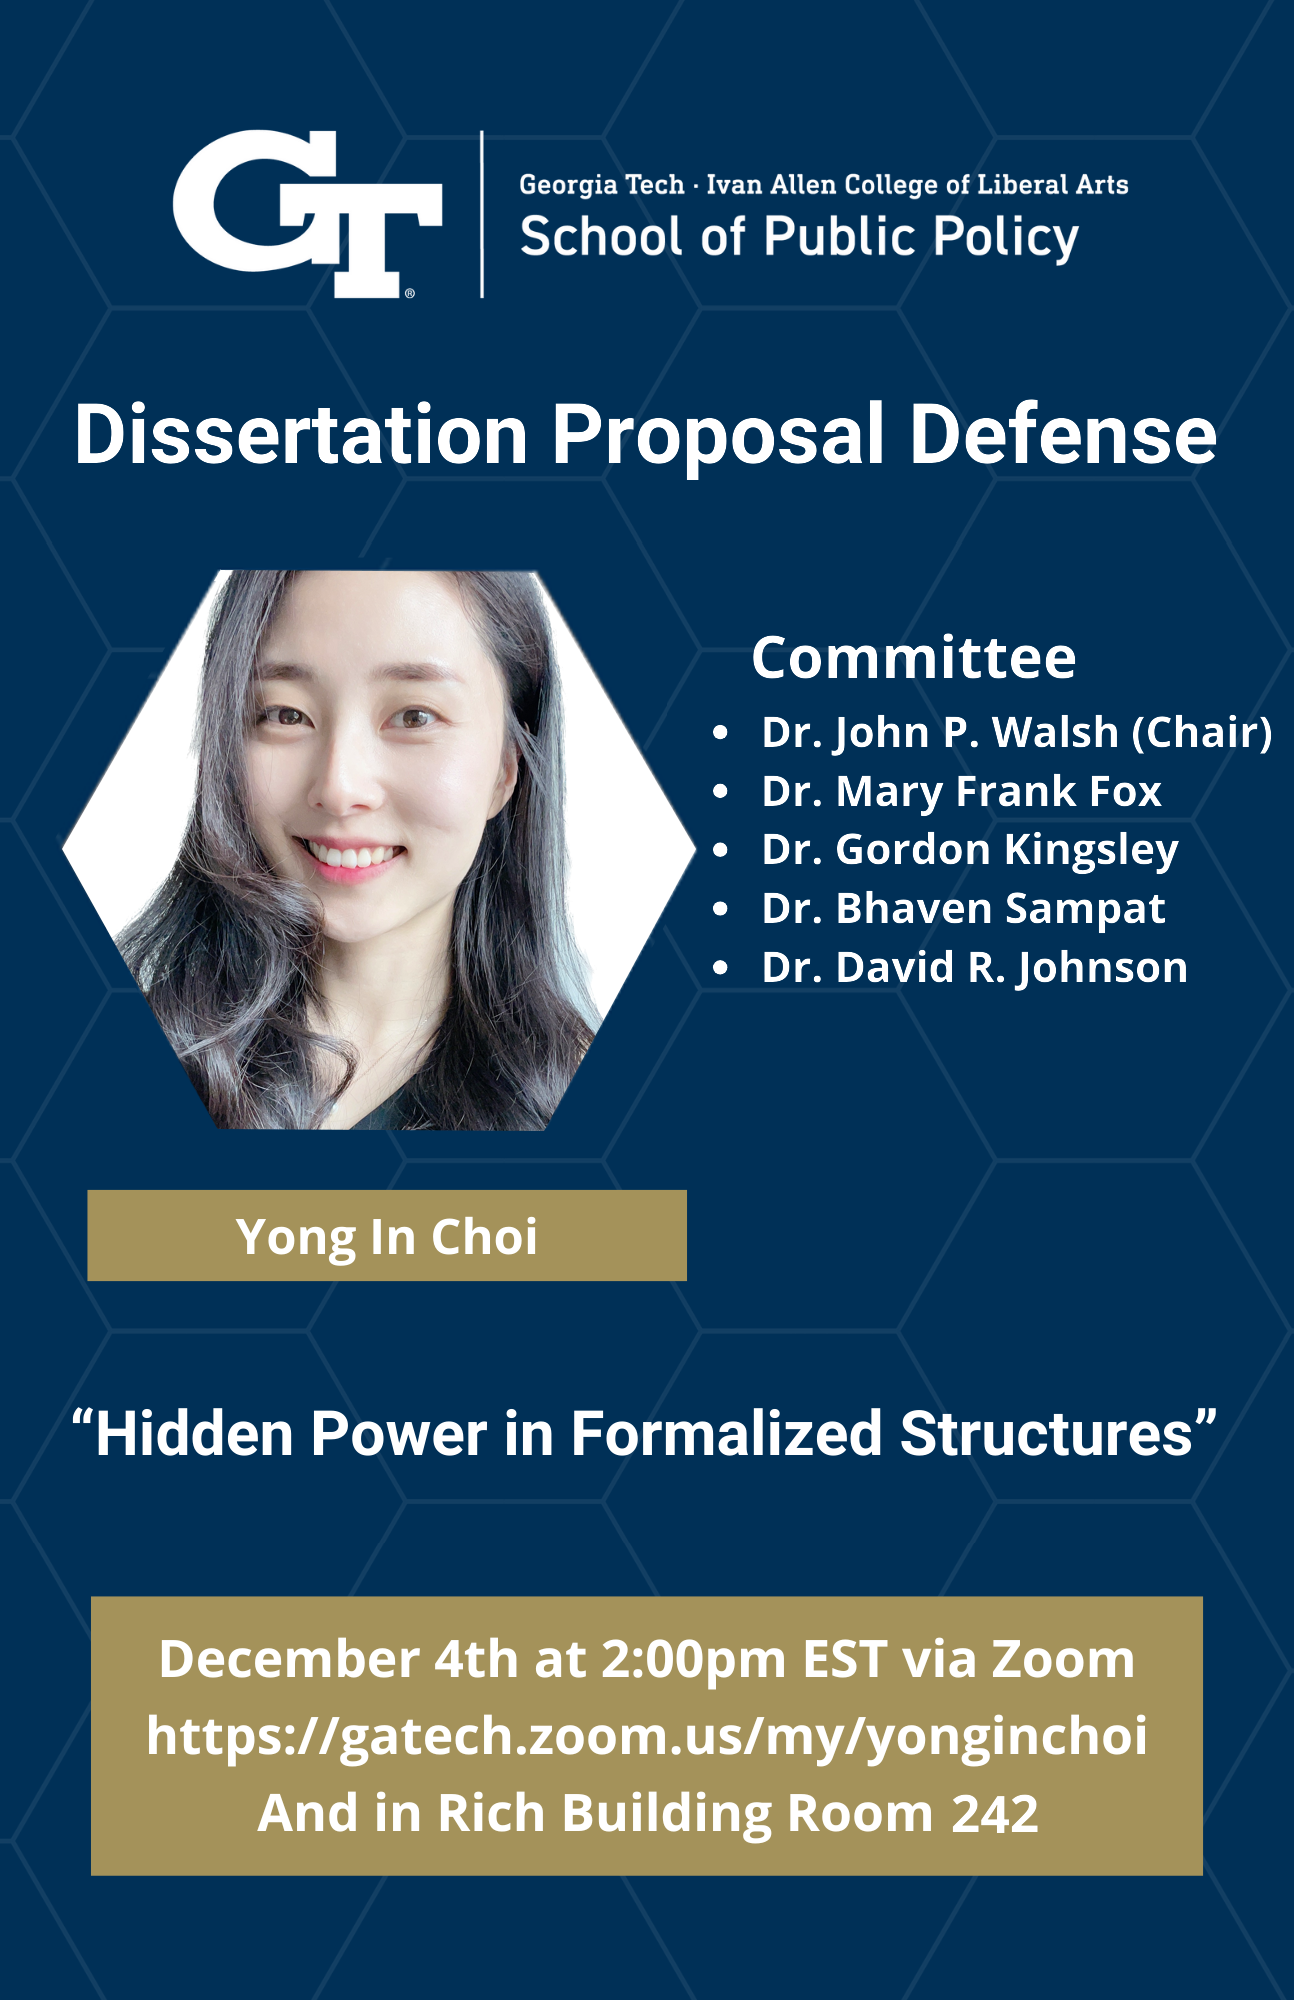 This flyer shows a headshot of Ph.D. Candidate Yong In Choi and lists the information of her Dissertation Proposal Defense at the Georgia Tech Ivan Allen College of Liberal Arts School of Public Policy. The committee consists of Dr. John P. Walsh, who is the chair, Dr. Mary Frank Fox, Dr. Gordon Kingsley, Dr. Bhaven Sampat, and Dr. David R. Johnson. The dissertation is tittled "Hidden Power in Formalized Structures" and will take place on December 4th at 2:00pm EST via zoom at https://gatech.zoom.us/my/yonginchoi and in Rich Building Room 242. 